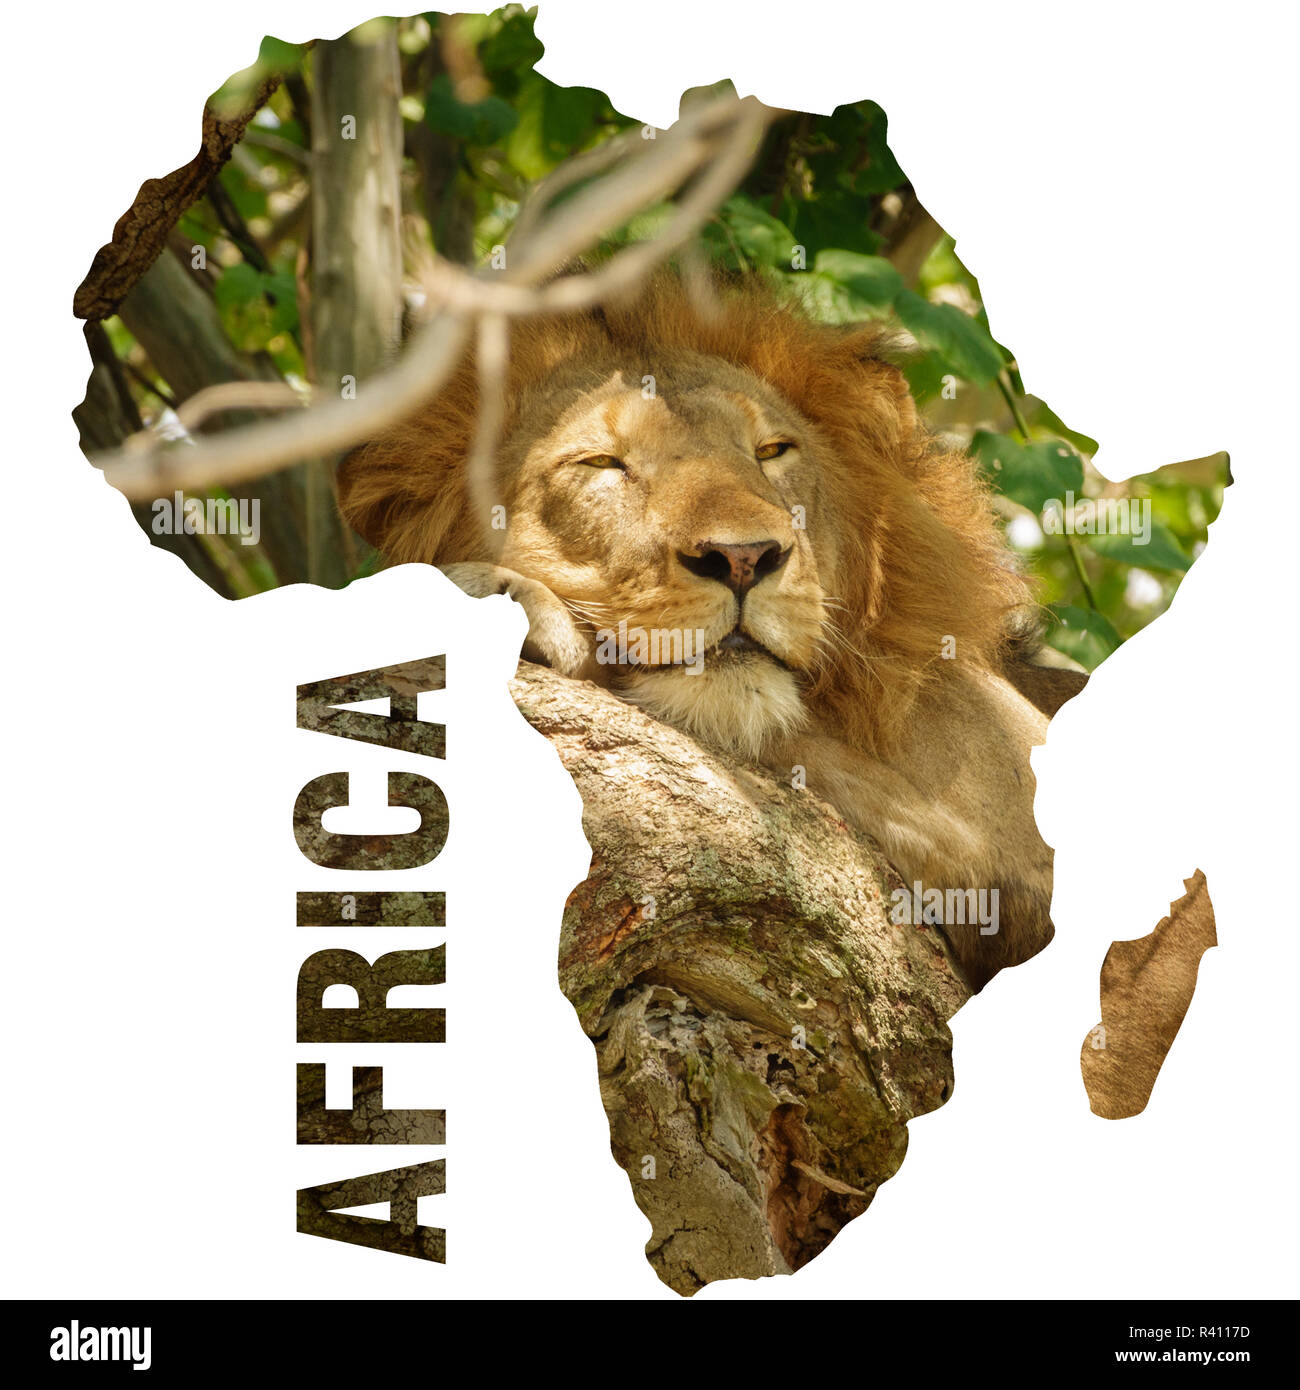 Wild lion sleepoing over tree branch and africa continent outline Stock Photo